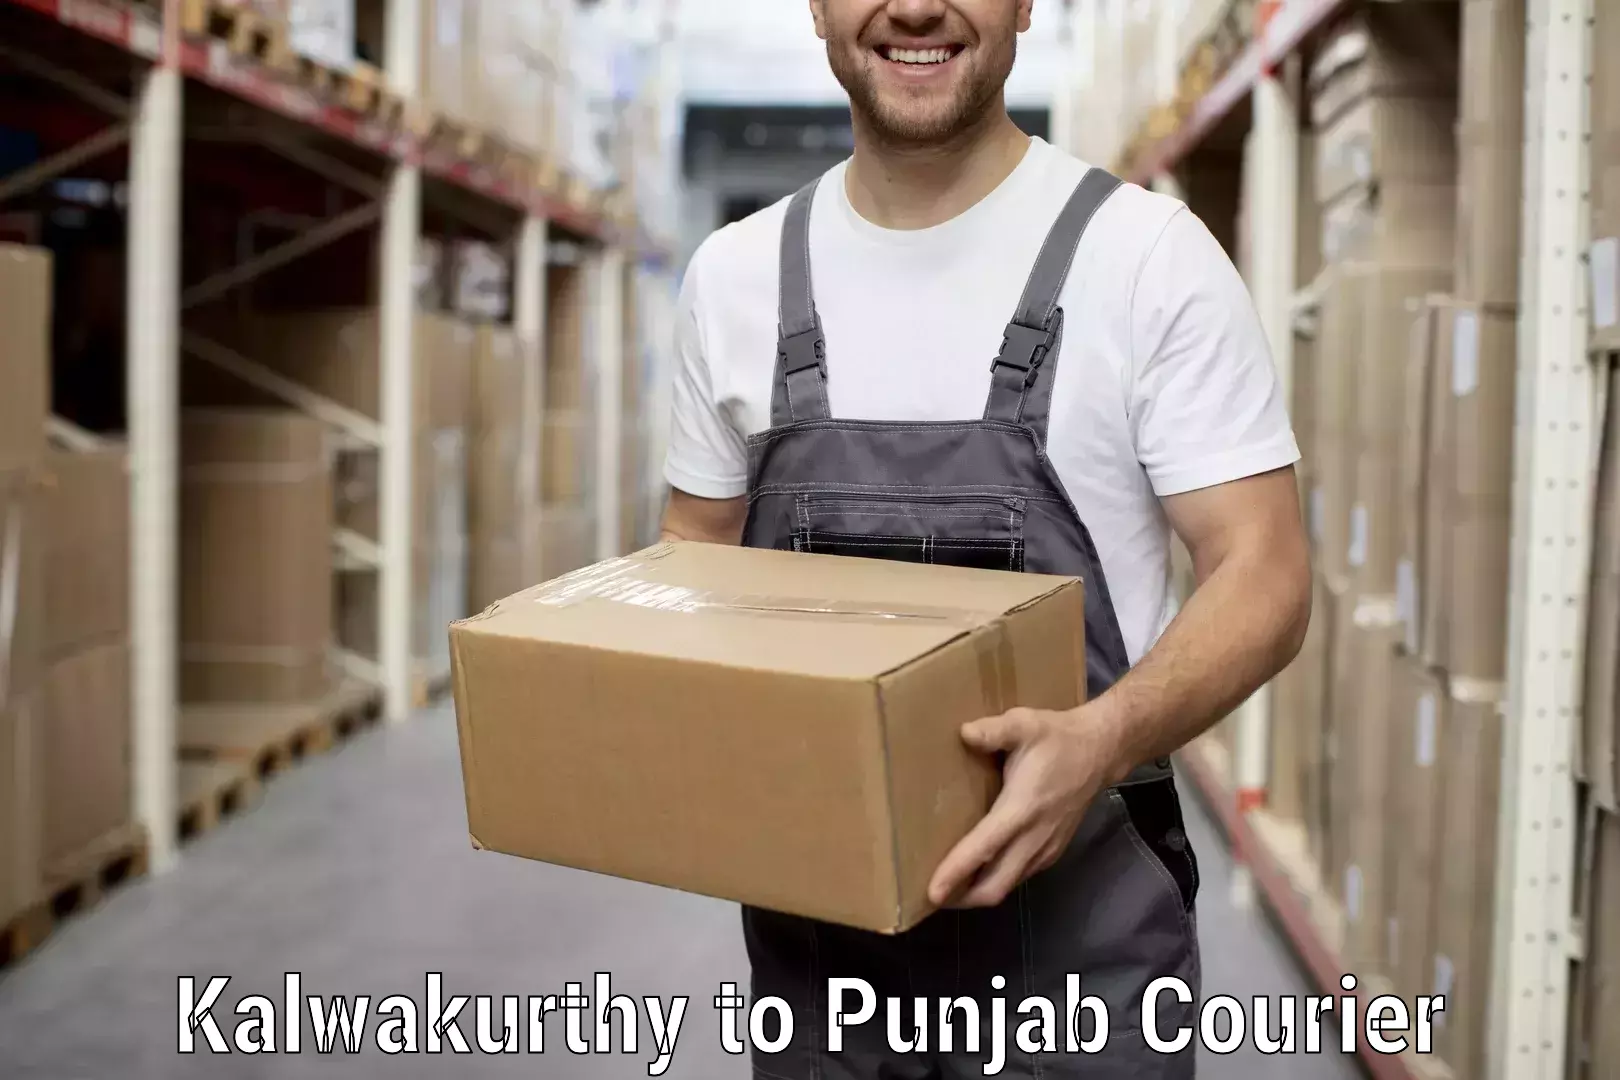 Professional movers and packers Kalwakurthy to Mohali